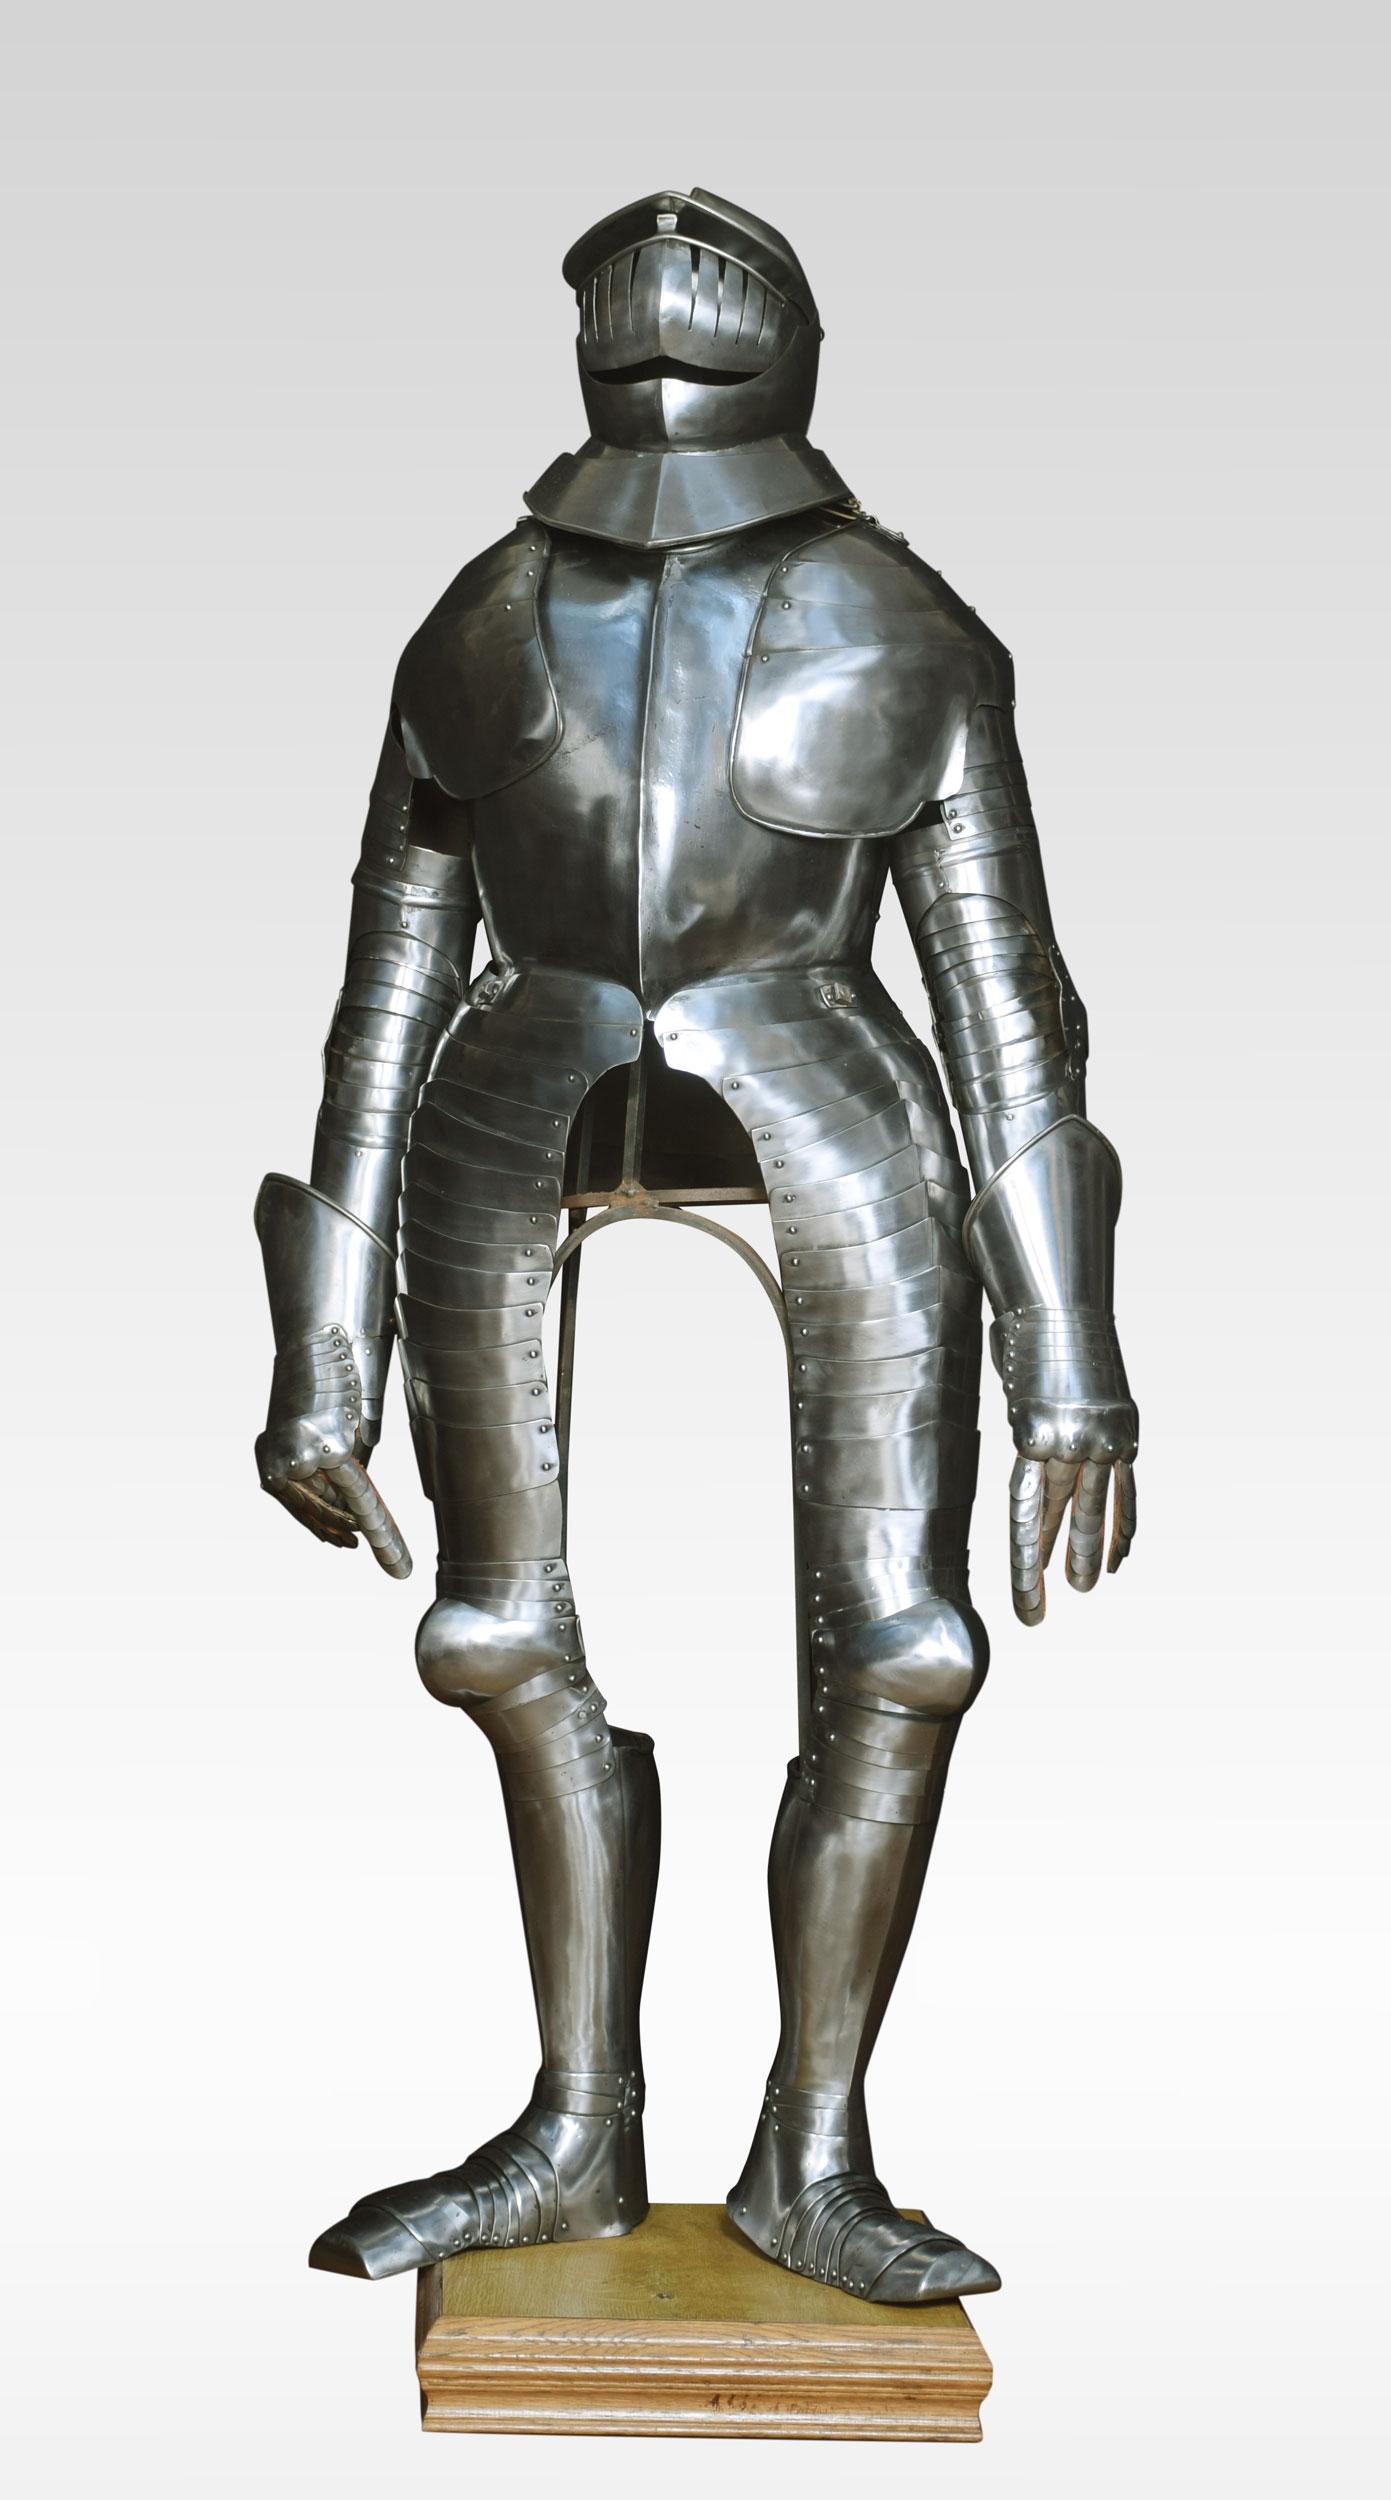 Cuirassier armour in the 17th century style. The helmet with a mild comb, open eyelets, large brow peak and two-piece visor, breastplate with raised medial ridge, shoulder and arm armour comprising multiple hinged plates, winged elbow cop, gauntlets